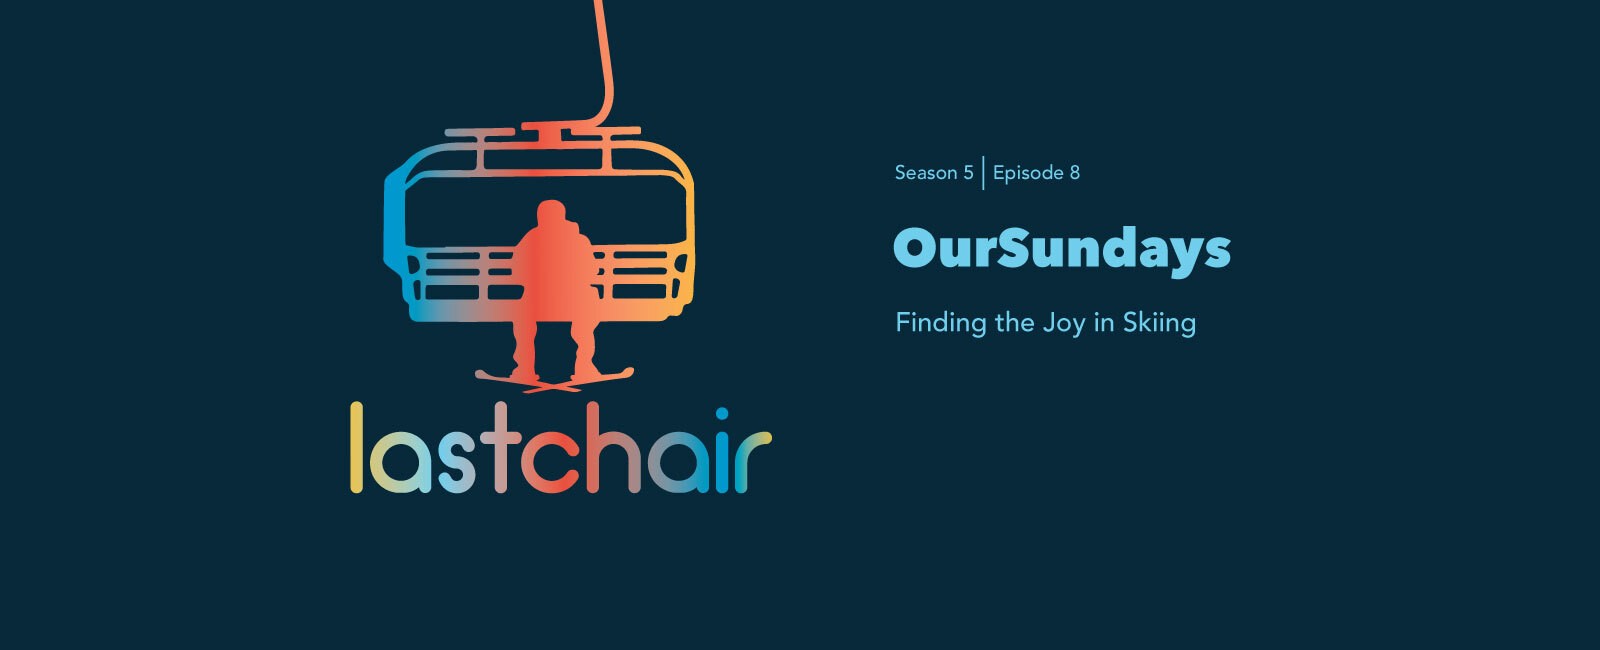 OurSundays: Finding the Joy in Skiing